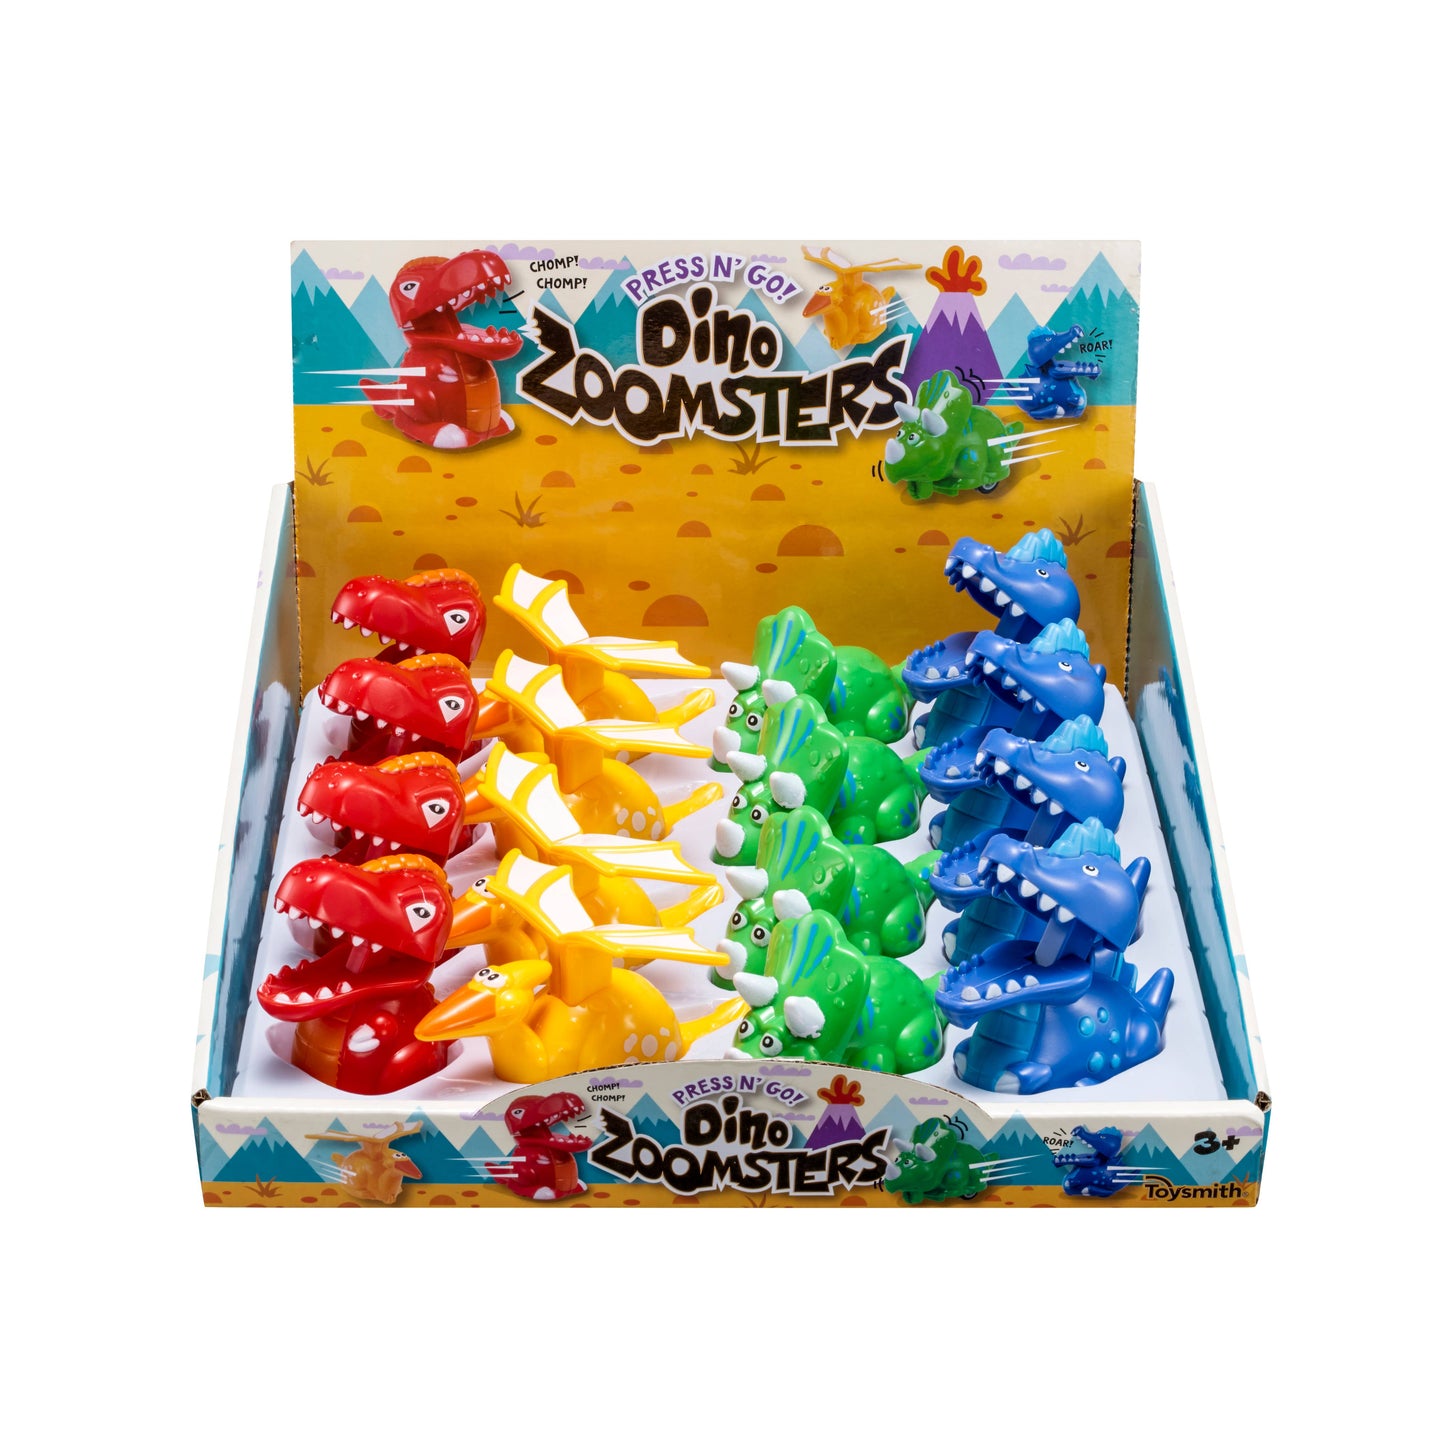 Toysmith - Dino Zoomsters, Assorted Colors/Styles, Press-N-Go Action